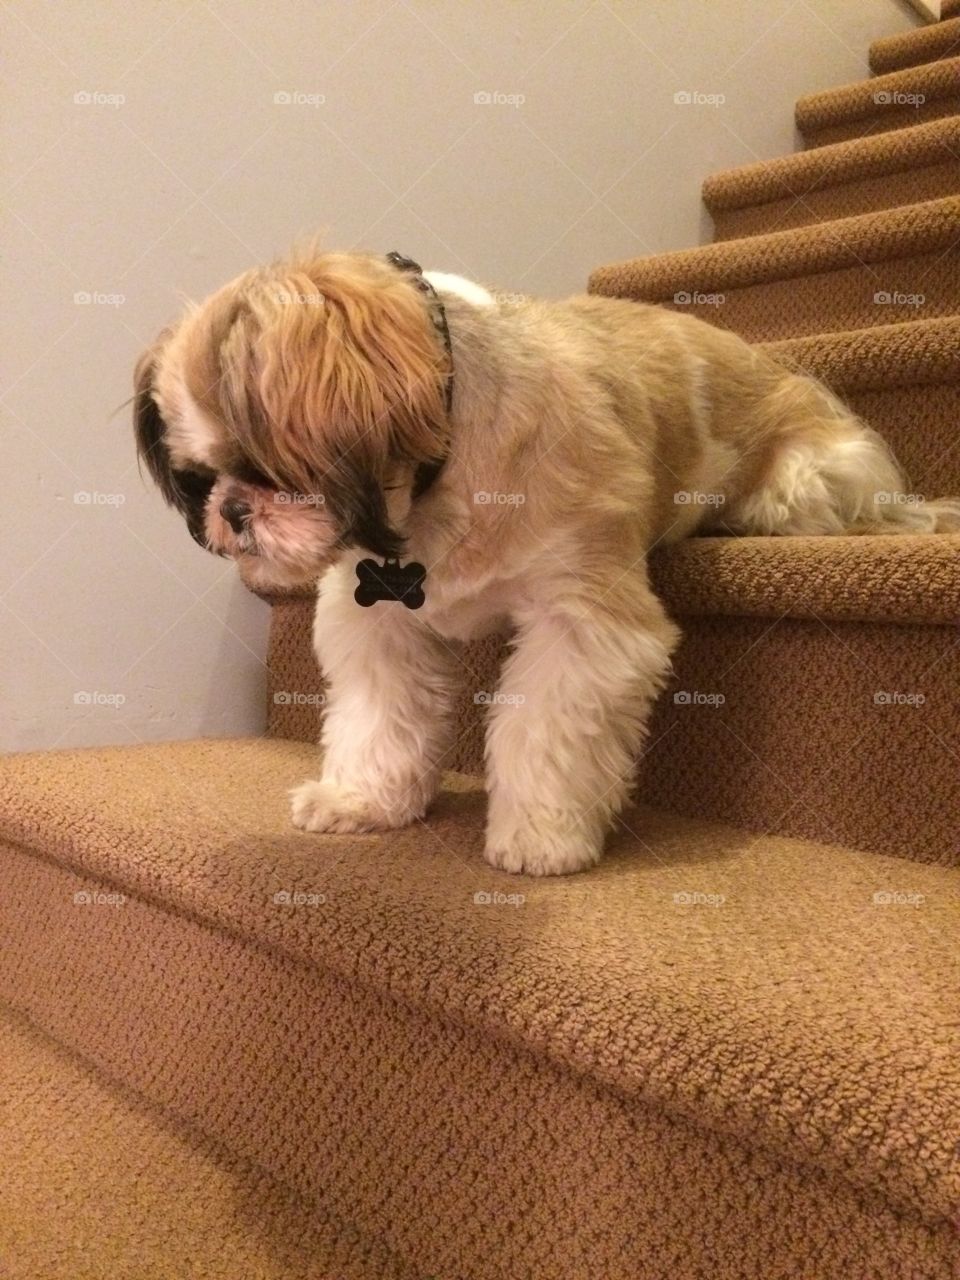 Dog is afraid of the stairs